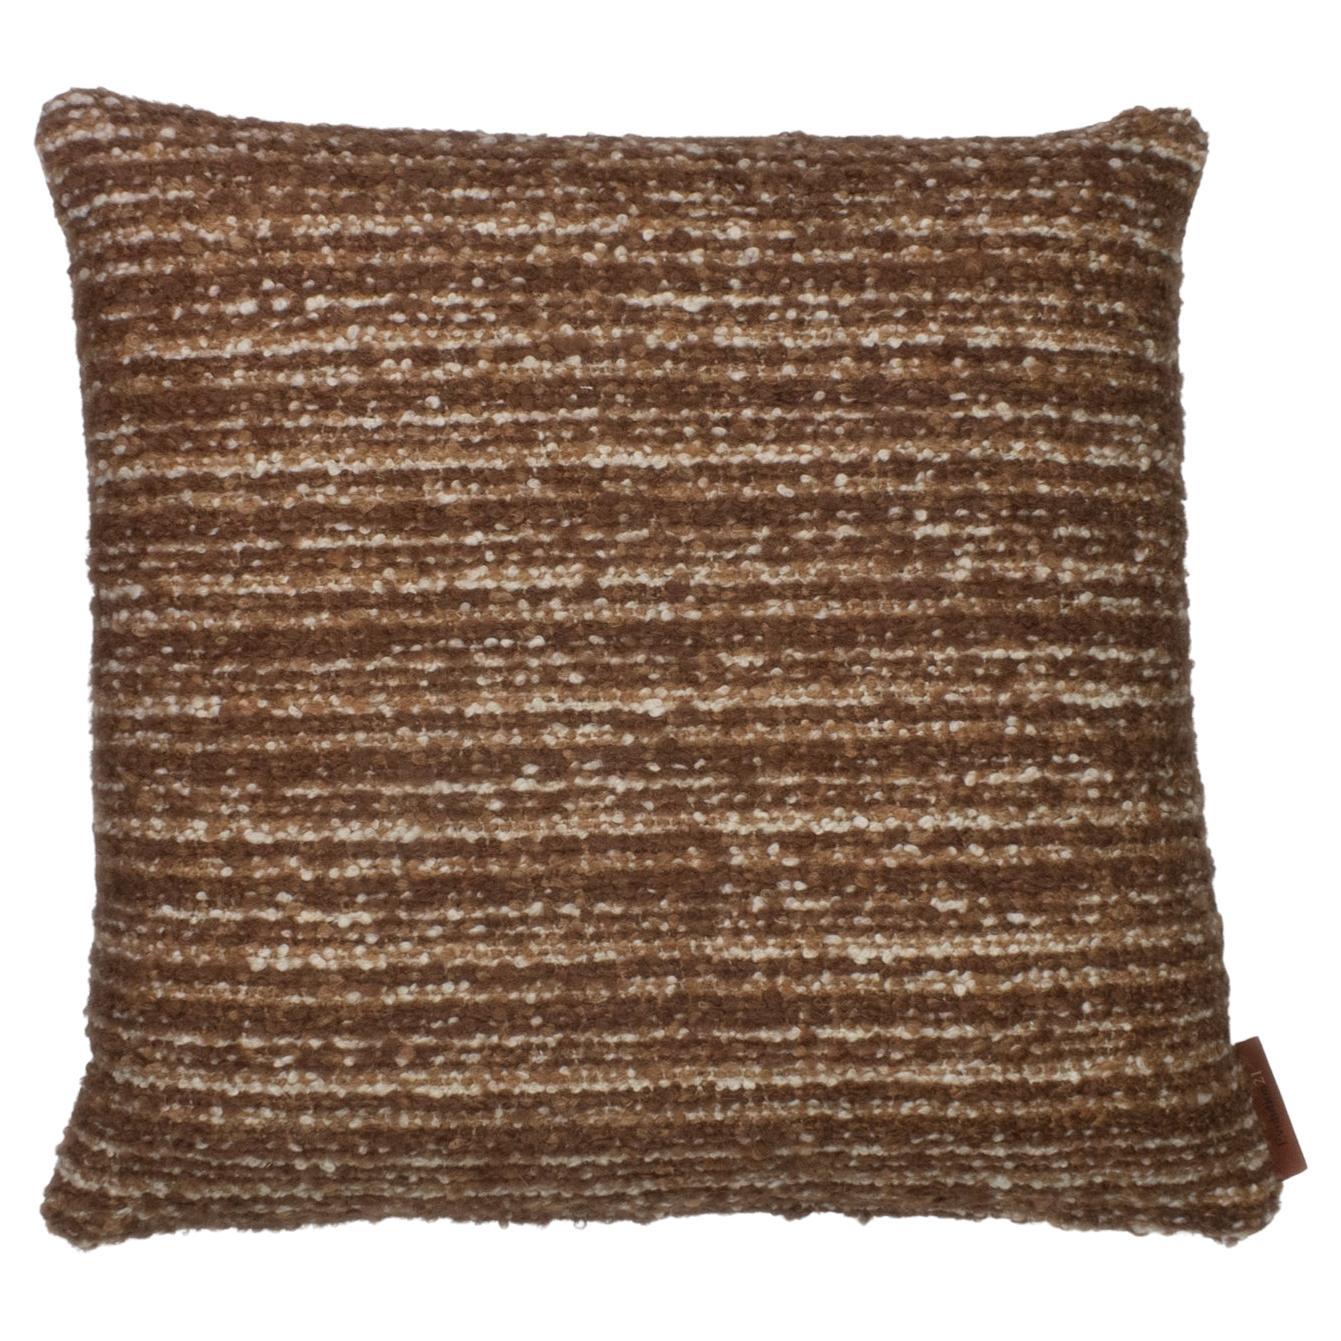 Cushion / Pillow Colorado Brown by Evolution21 For Sale